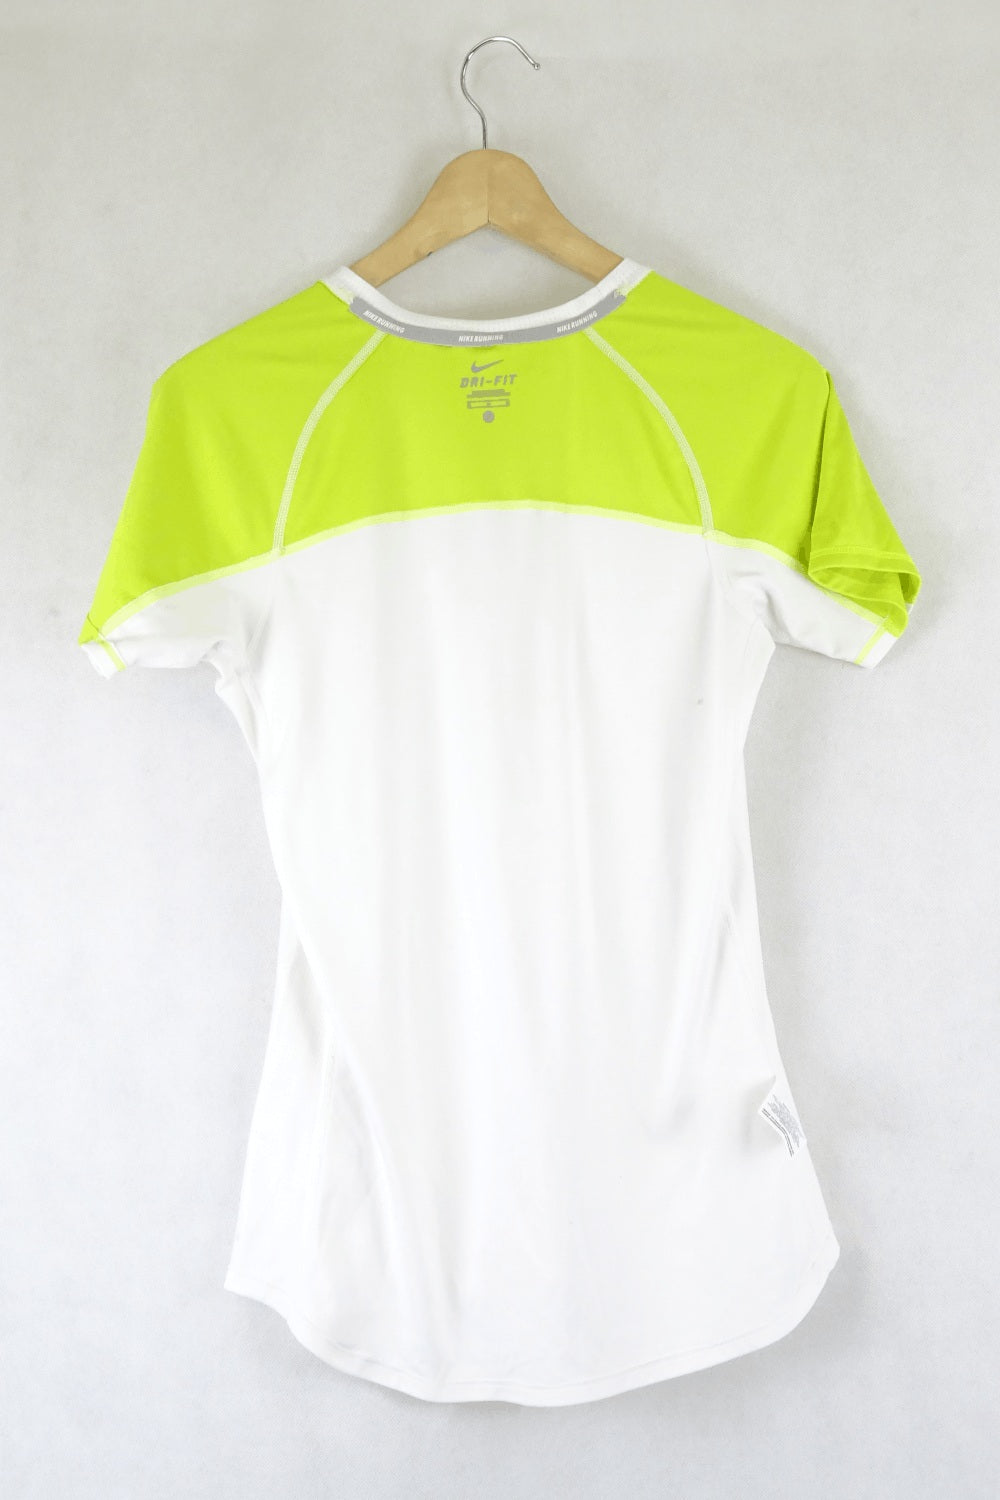 Nike Yellow And White Top S